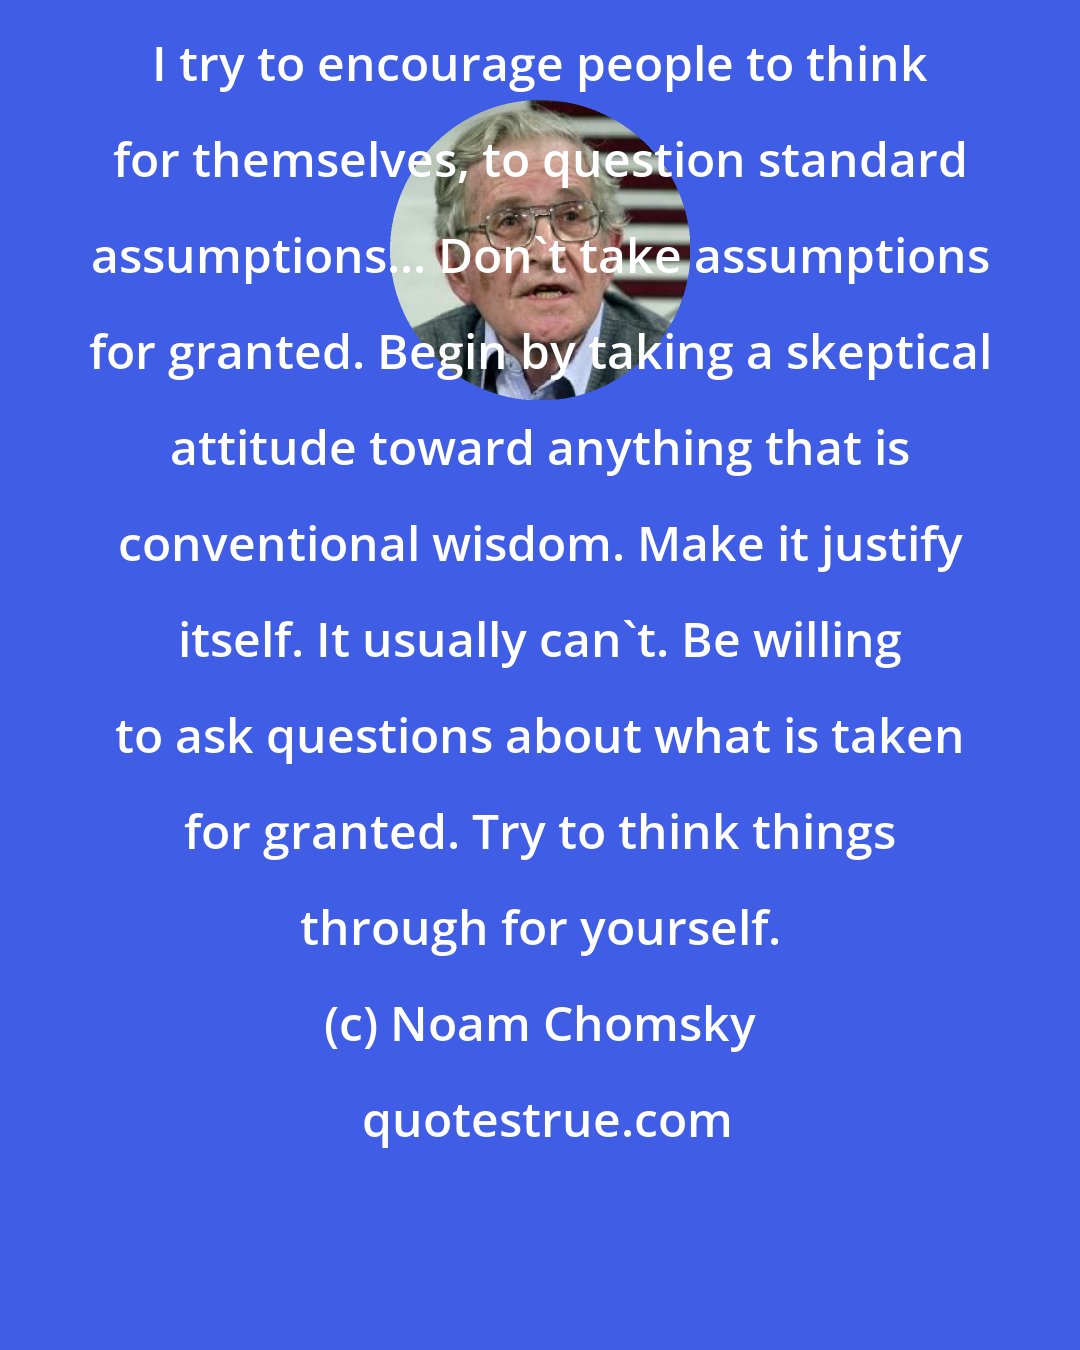 Noam Chomsky: I try to encourage people to think for themselves, to question standard assumptions... Don't take assumptions for granted. Begin by taking a skeptical attitude toward anything that is conventional wisdom. Make it justify itself. It usually can't. Be willing to ask questions about what is taken for granted. Try to think things through for yourself.